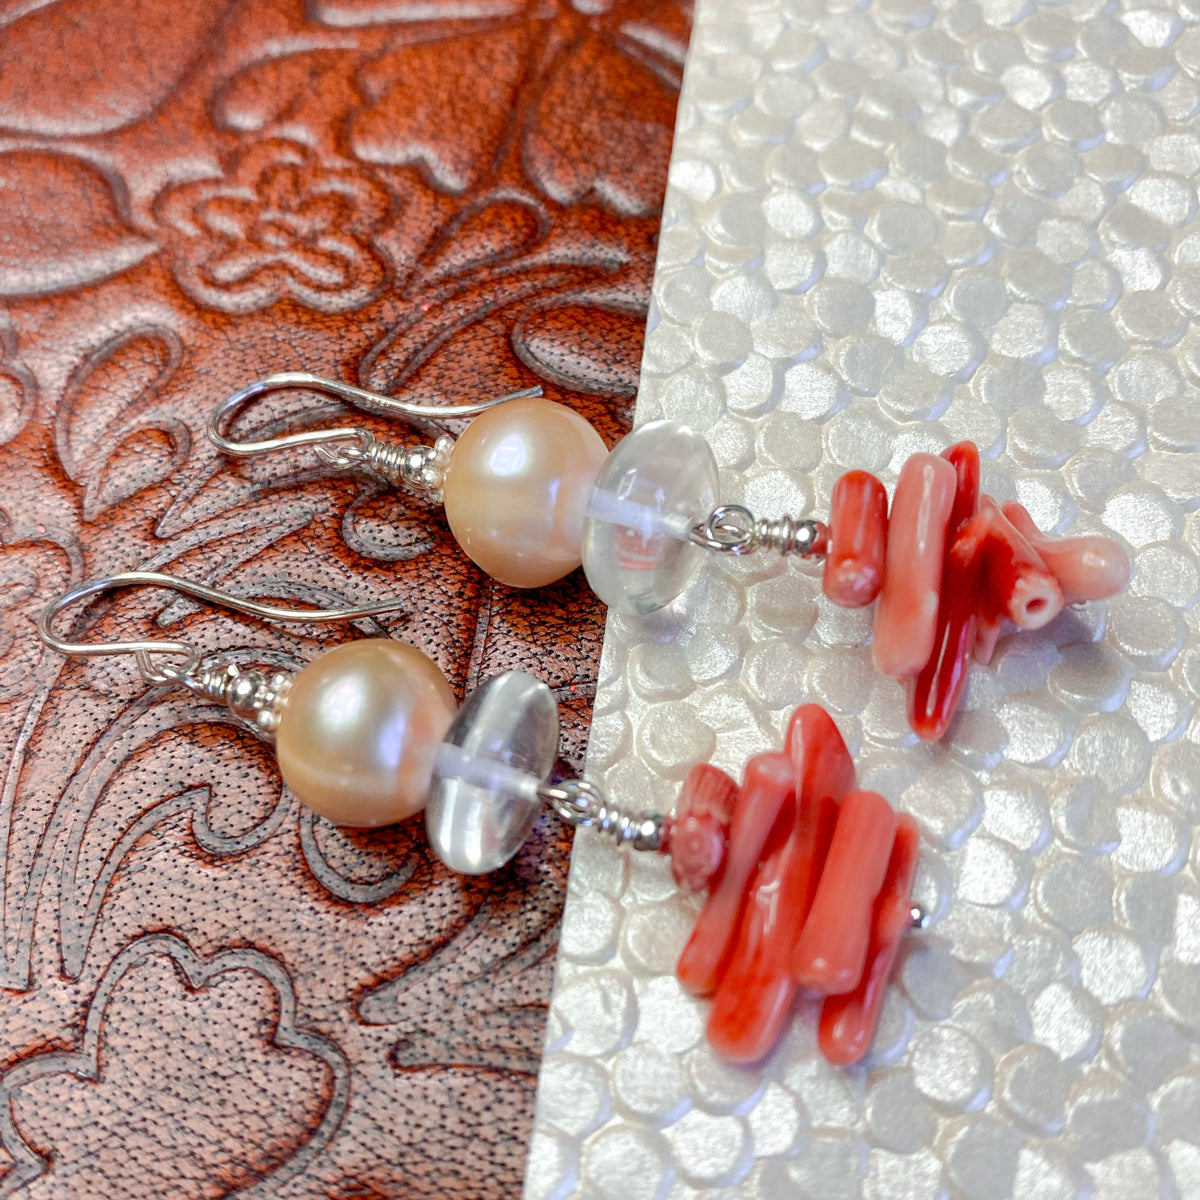 Dyed Red Coral & Freshwater Pearl Earrings